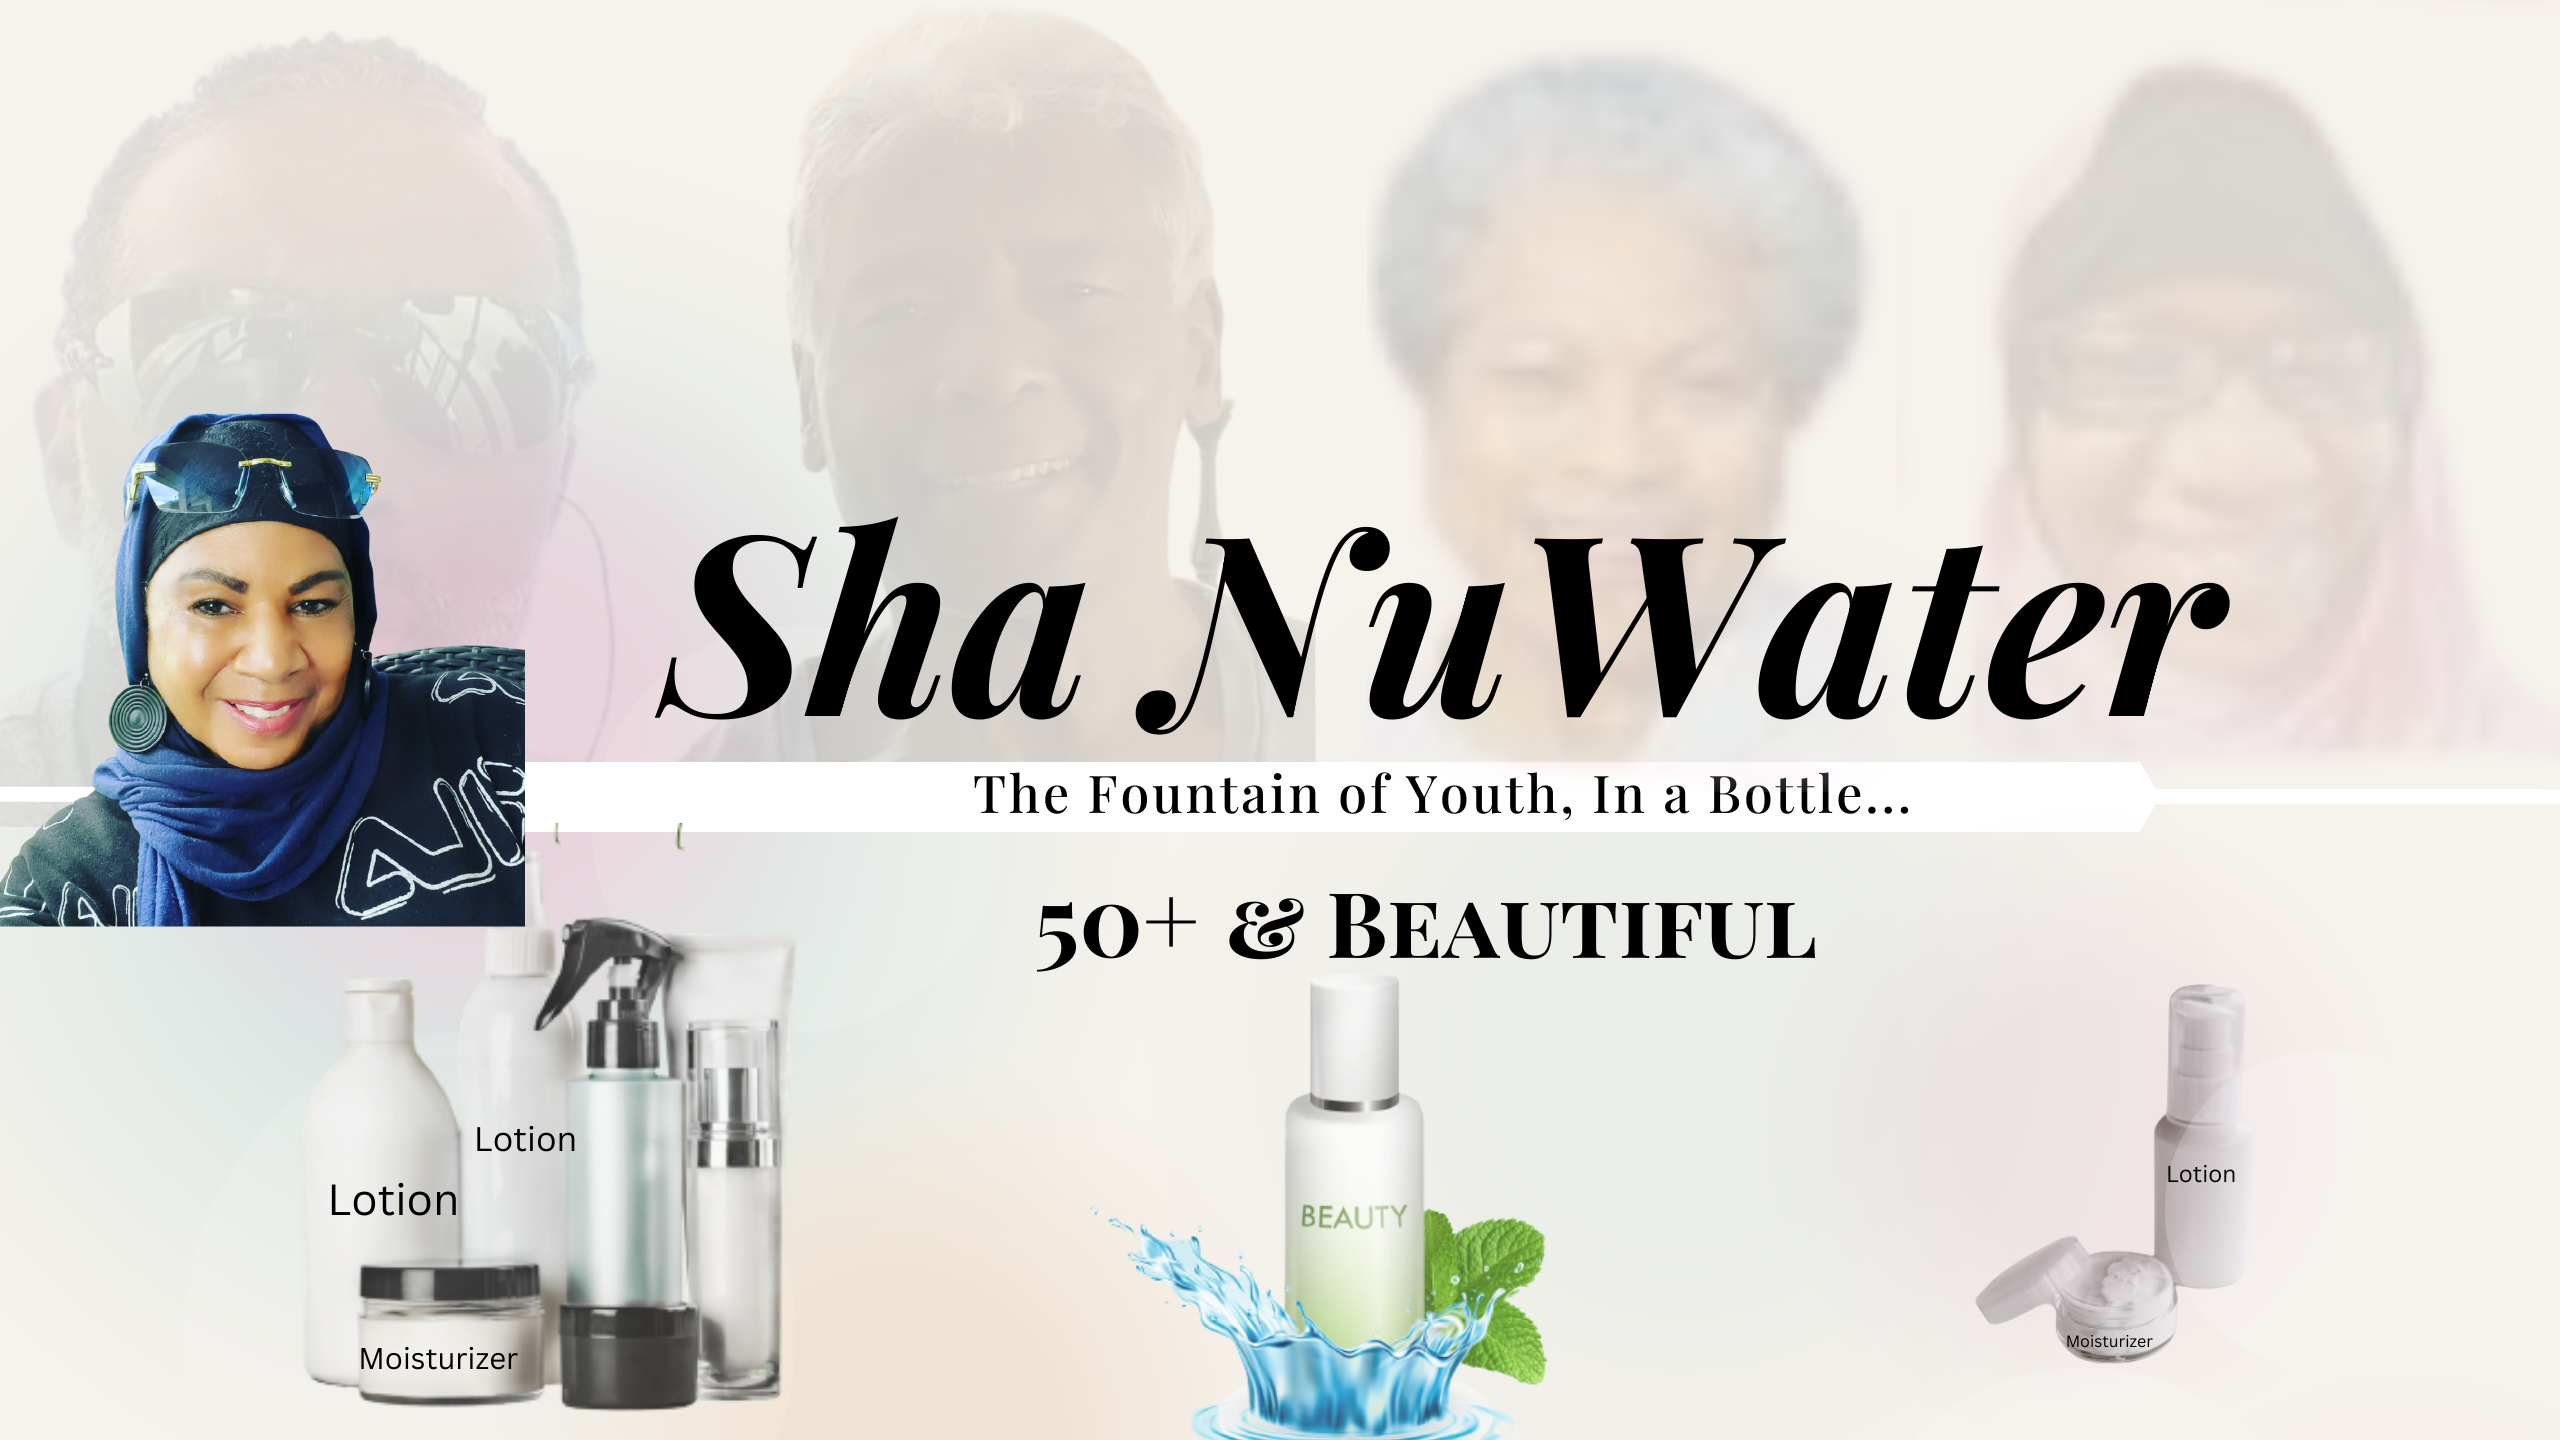 ShaNuWater Fountain Of Youth Brand Banner